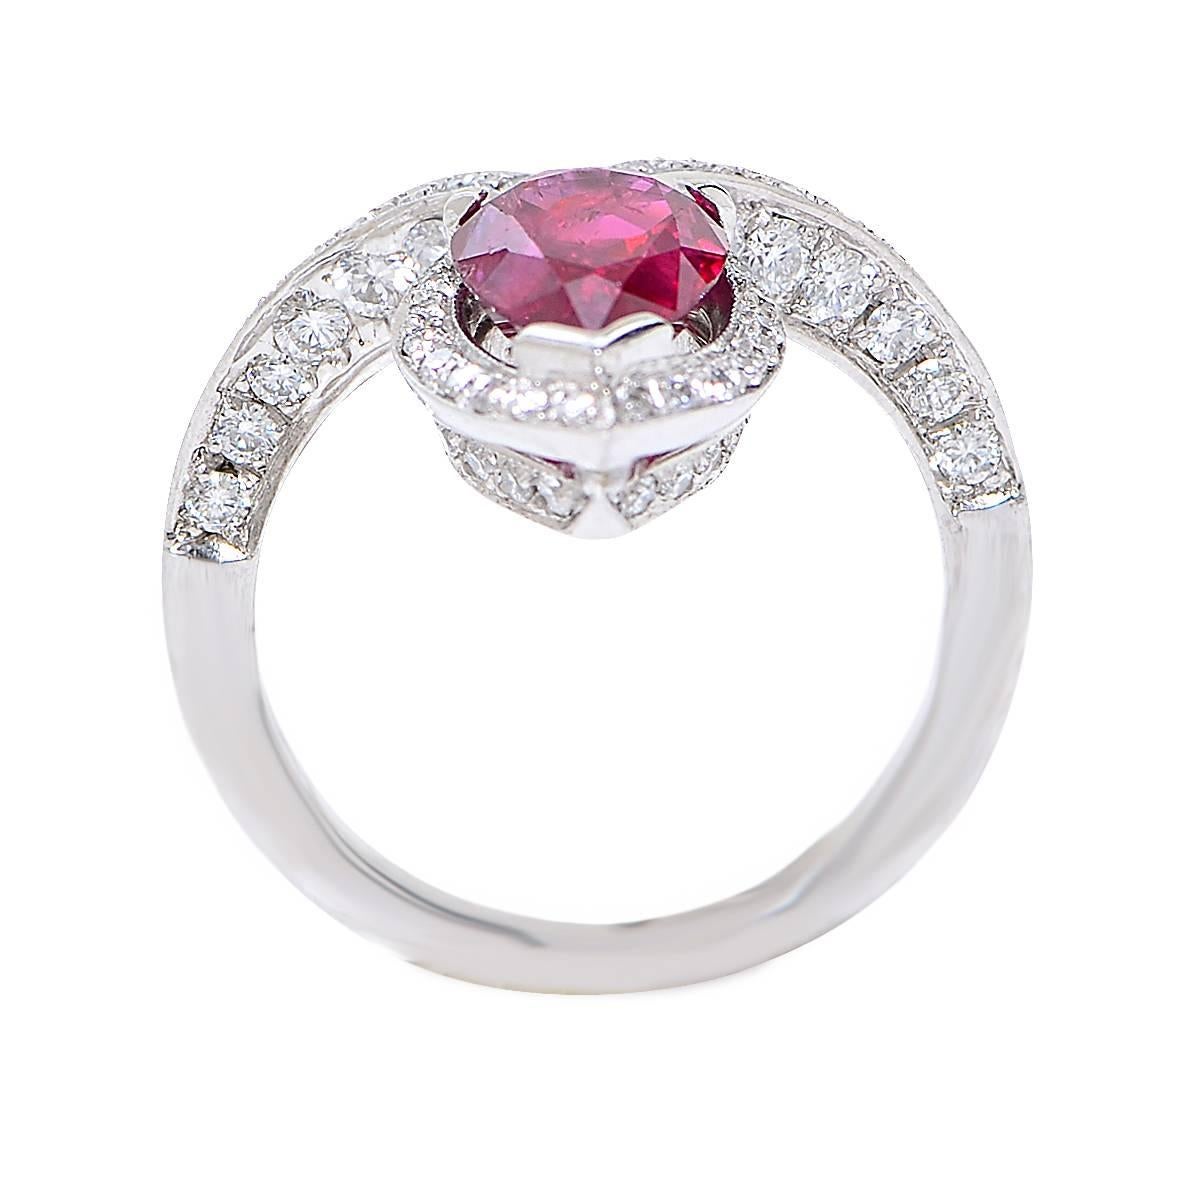 Platinum ring featuring a 2.21ct pear shape cut natural ruby accented by 72 round brilliant cut diamonds.

Metal weight: 7.85 grams

This ruby and diamond ring is accompanied by a retail appraisal performed by a Graduate Gemologist.